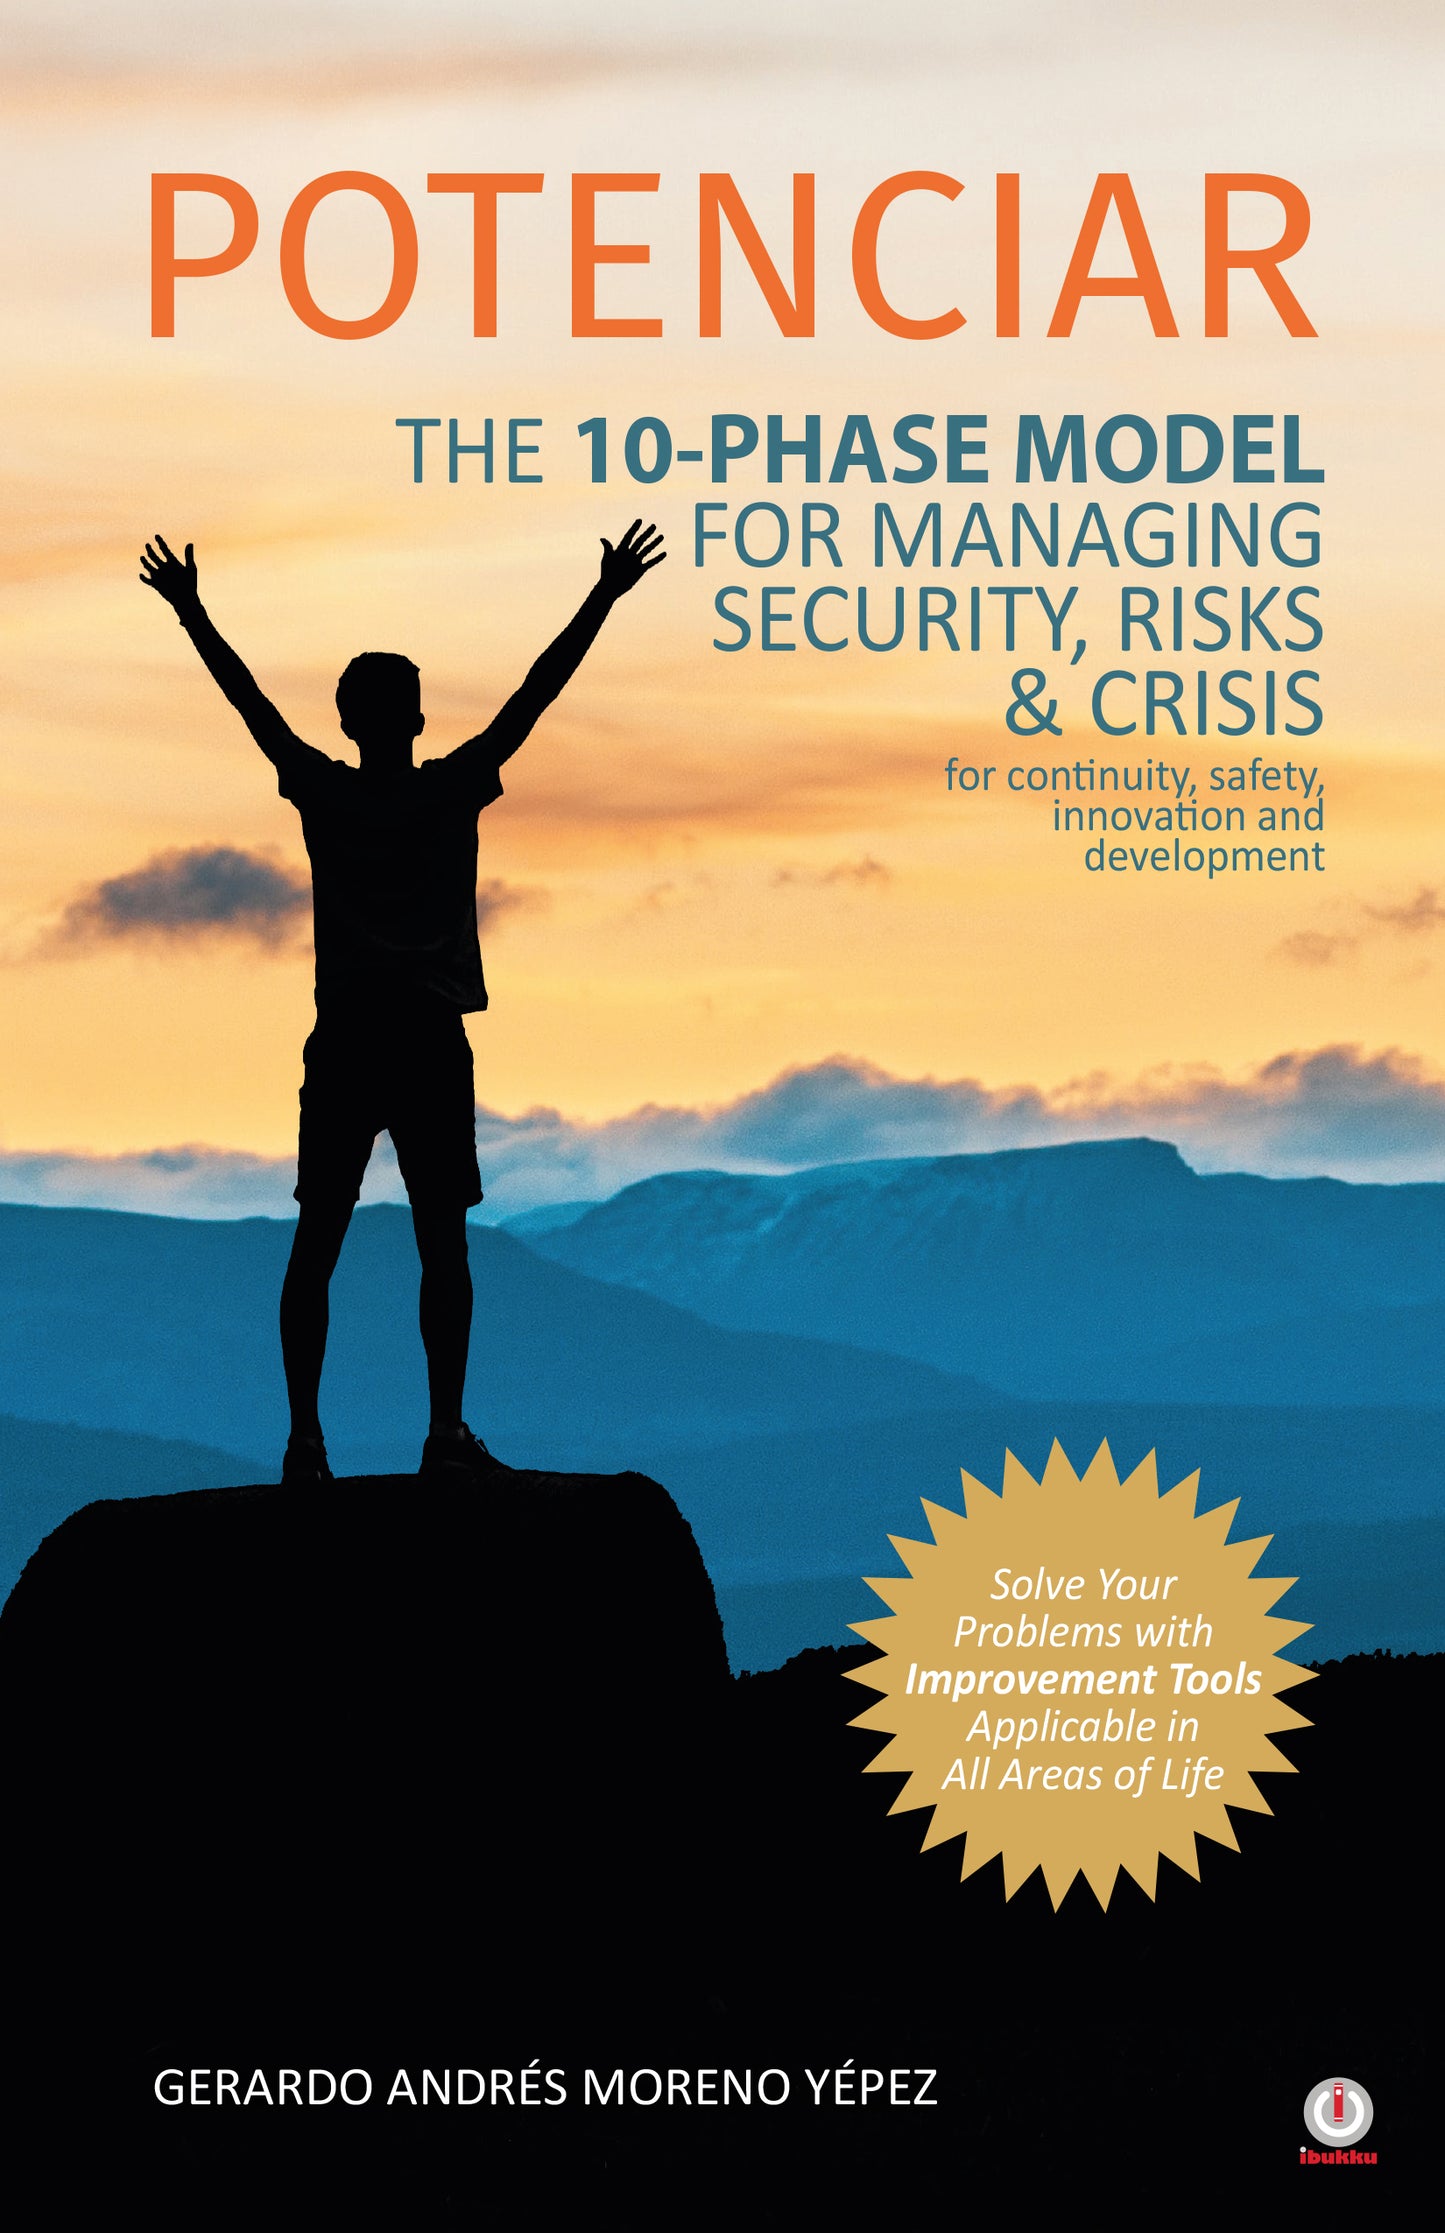 The 10-Phase Model For Managing Security, Risks & Crisis (Impreso)